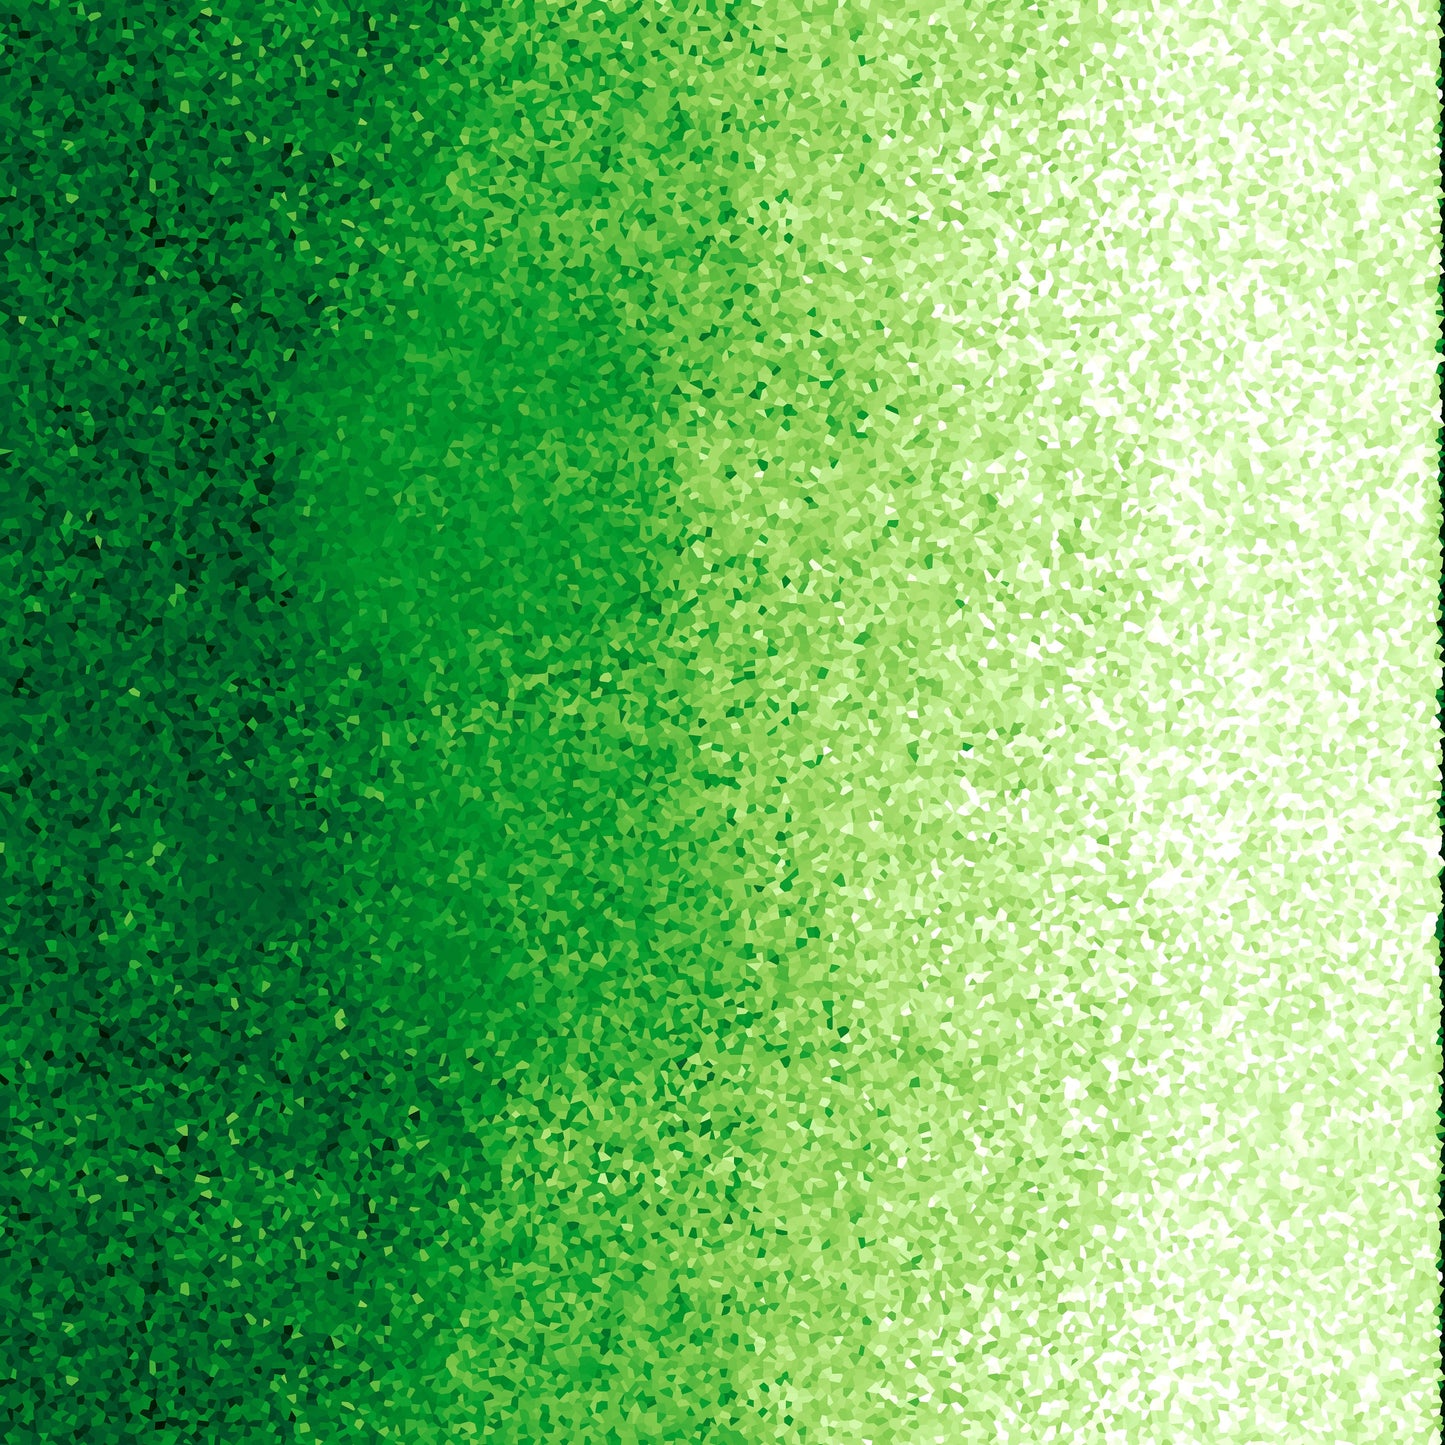 Unicorn O Copia by Lisa Morales Ombre Texture Green 9894-66 Digitally Printed Cotton Woven Fabric